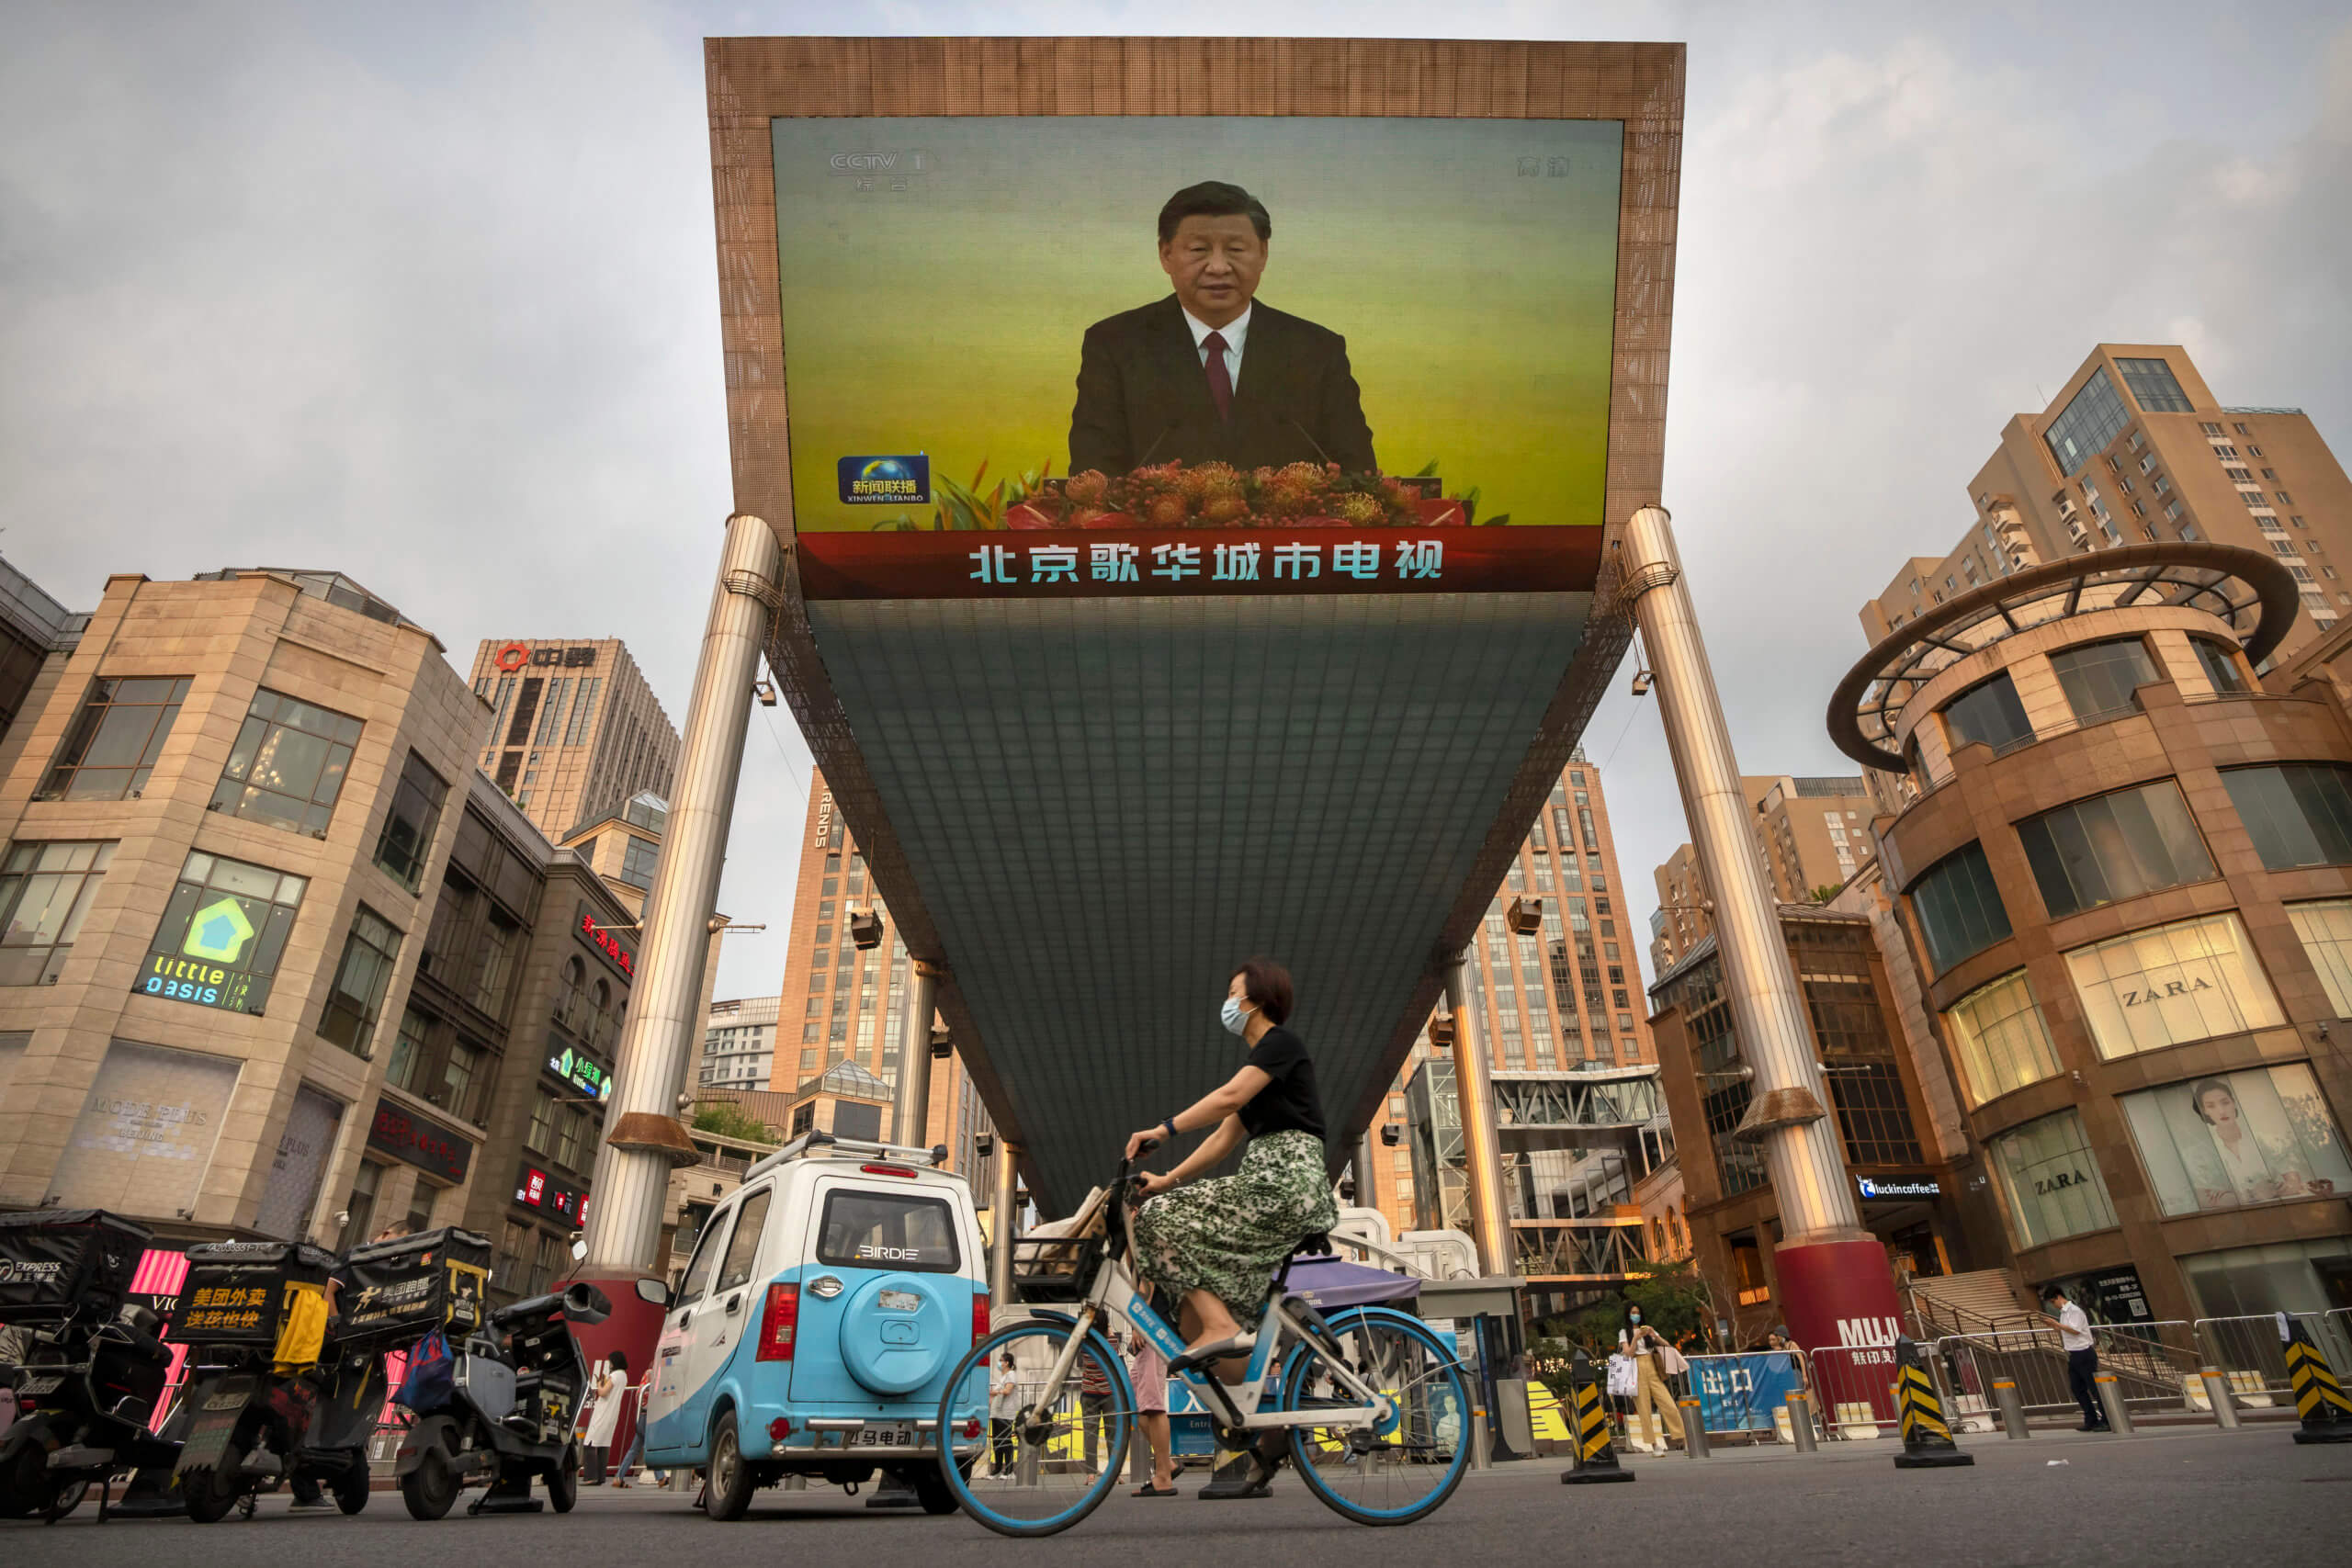 A woman wearing a face mask rides a bicycle past a large television screen at a shopping center displaying Chinese state television news coverage of Chinese President Xi Jinping's visit to Hong Kong in Beijing, Friday, July 1, 2022. (AP Photo/Mark Schiefelbein)